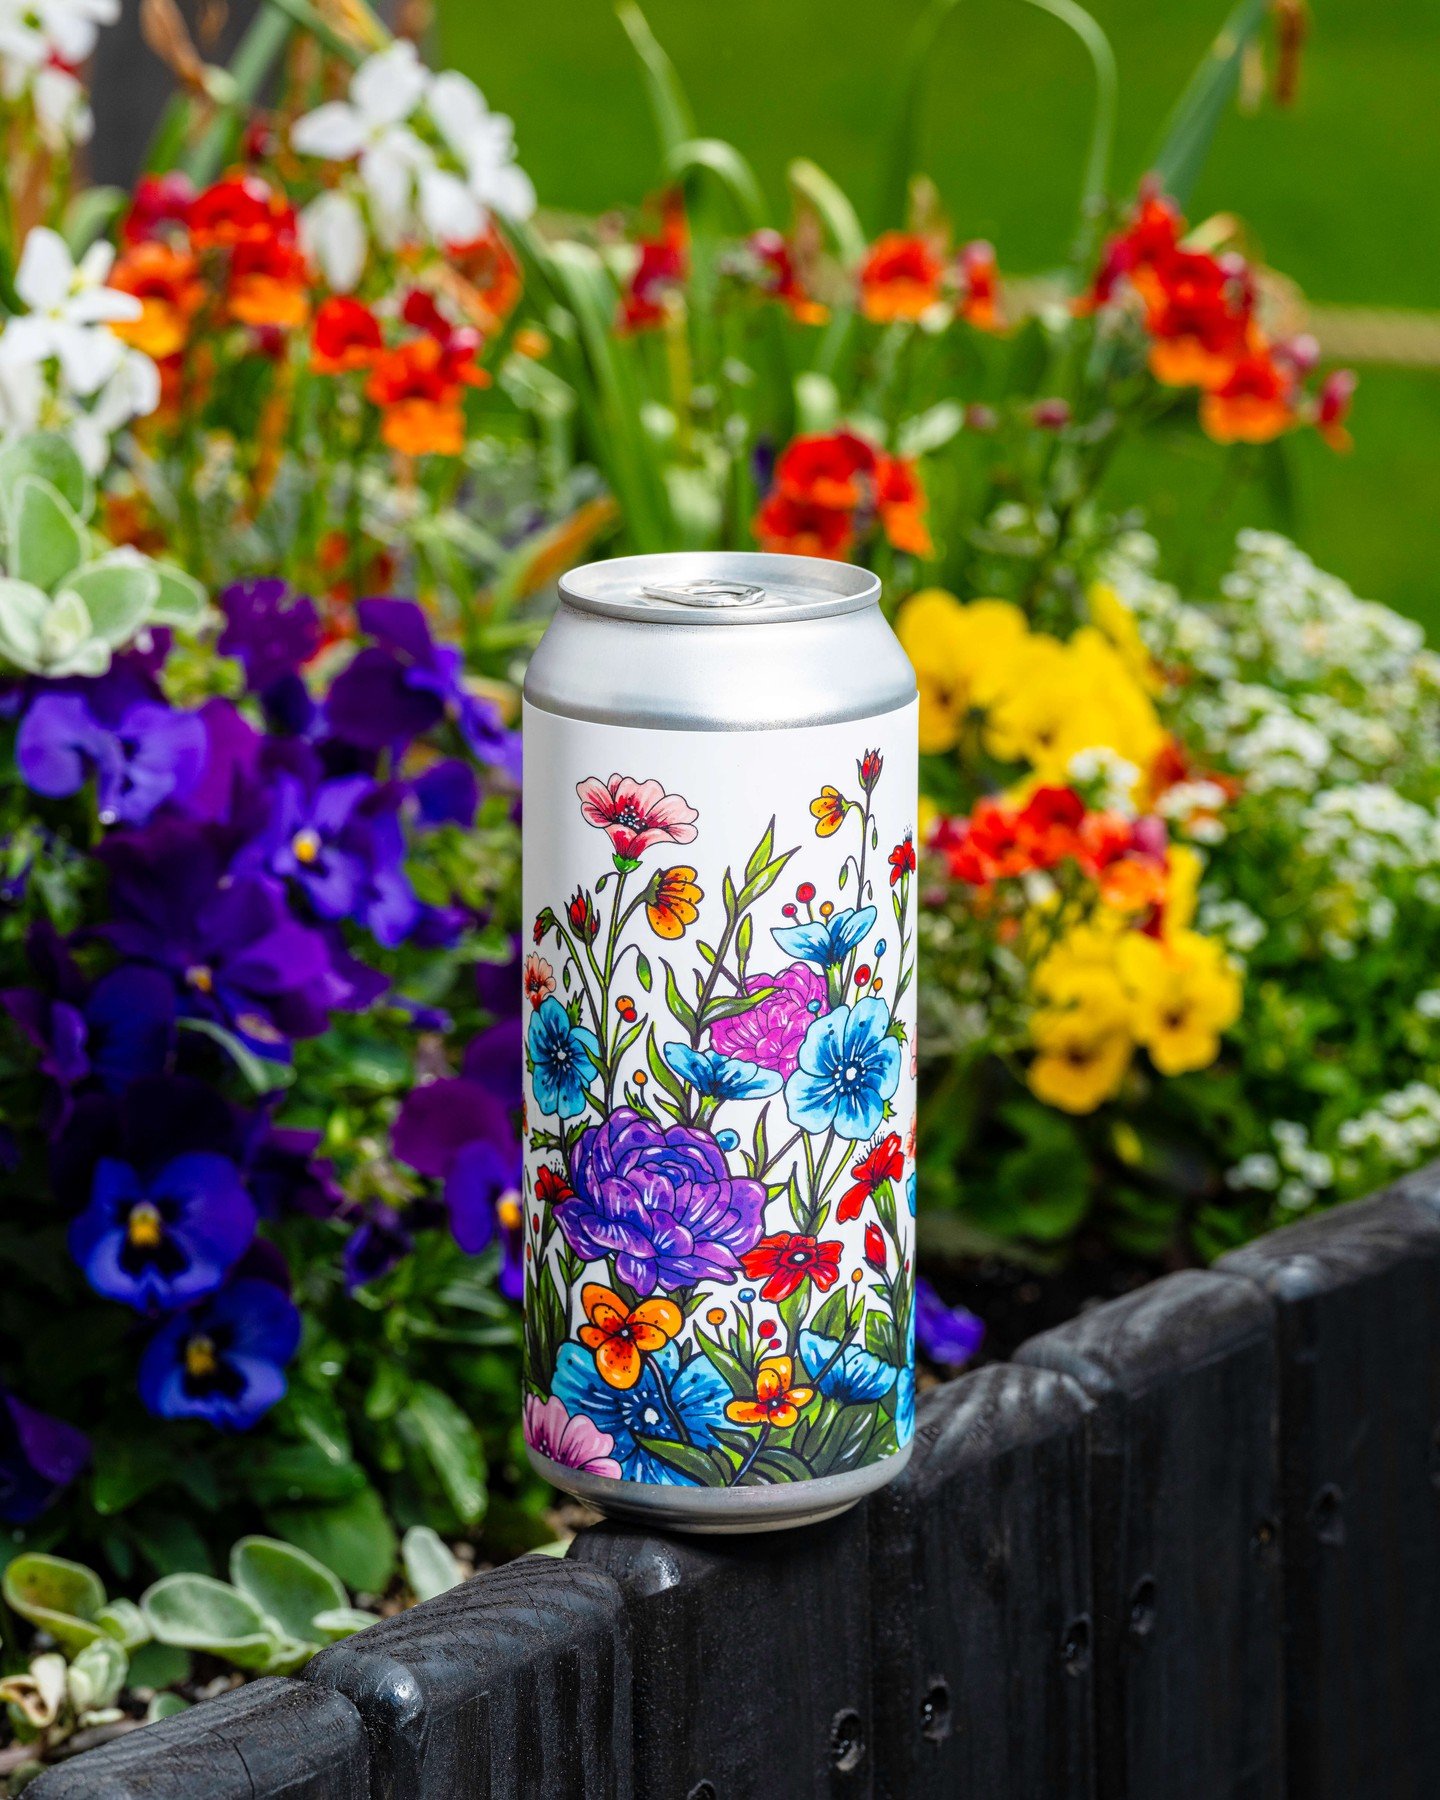 It's an immaculate day outside, and feelings of Spring abound!

Do not sleep on this seasonal Double IPA - A simple grist of 2-Row and Dextrin malt is utilized to create a glowing yellow beer that is visually appealing. Spring is crafted with our hou